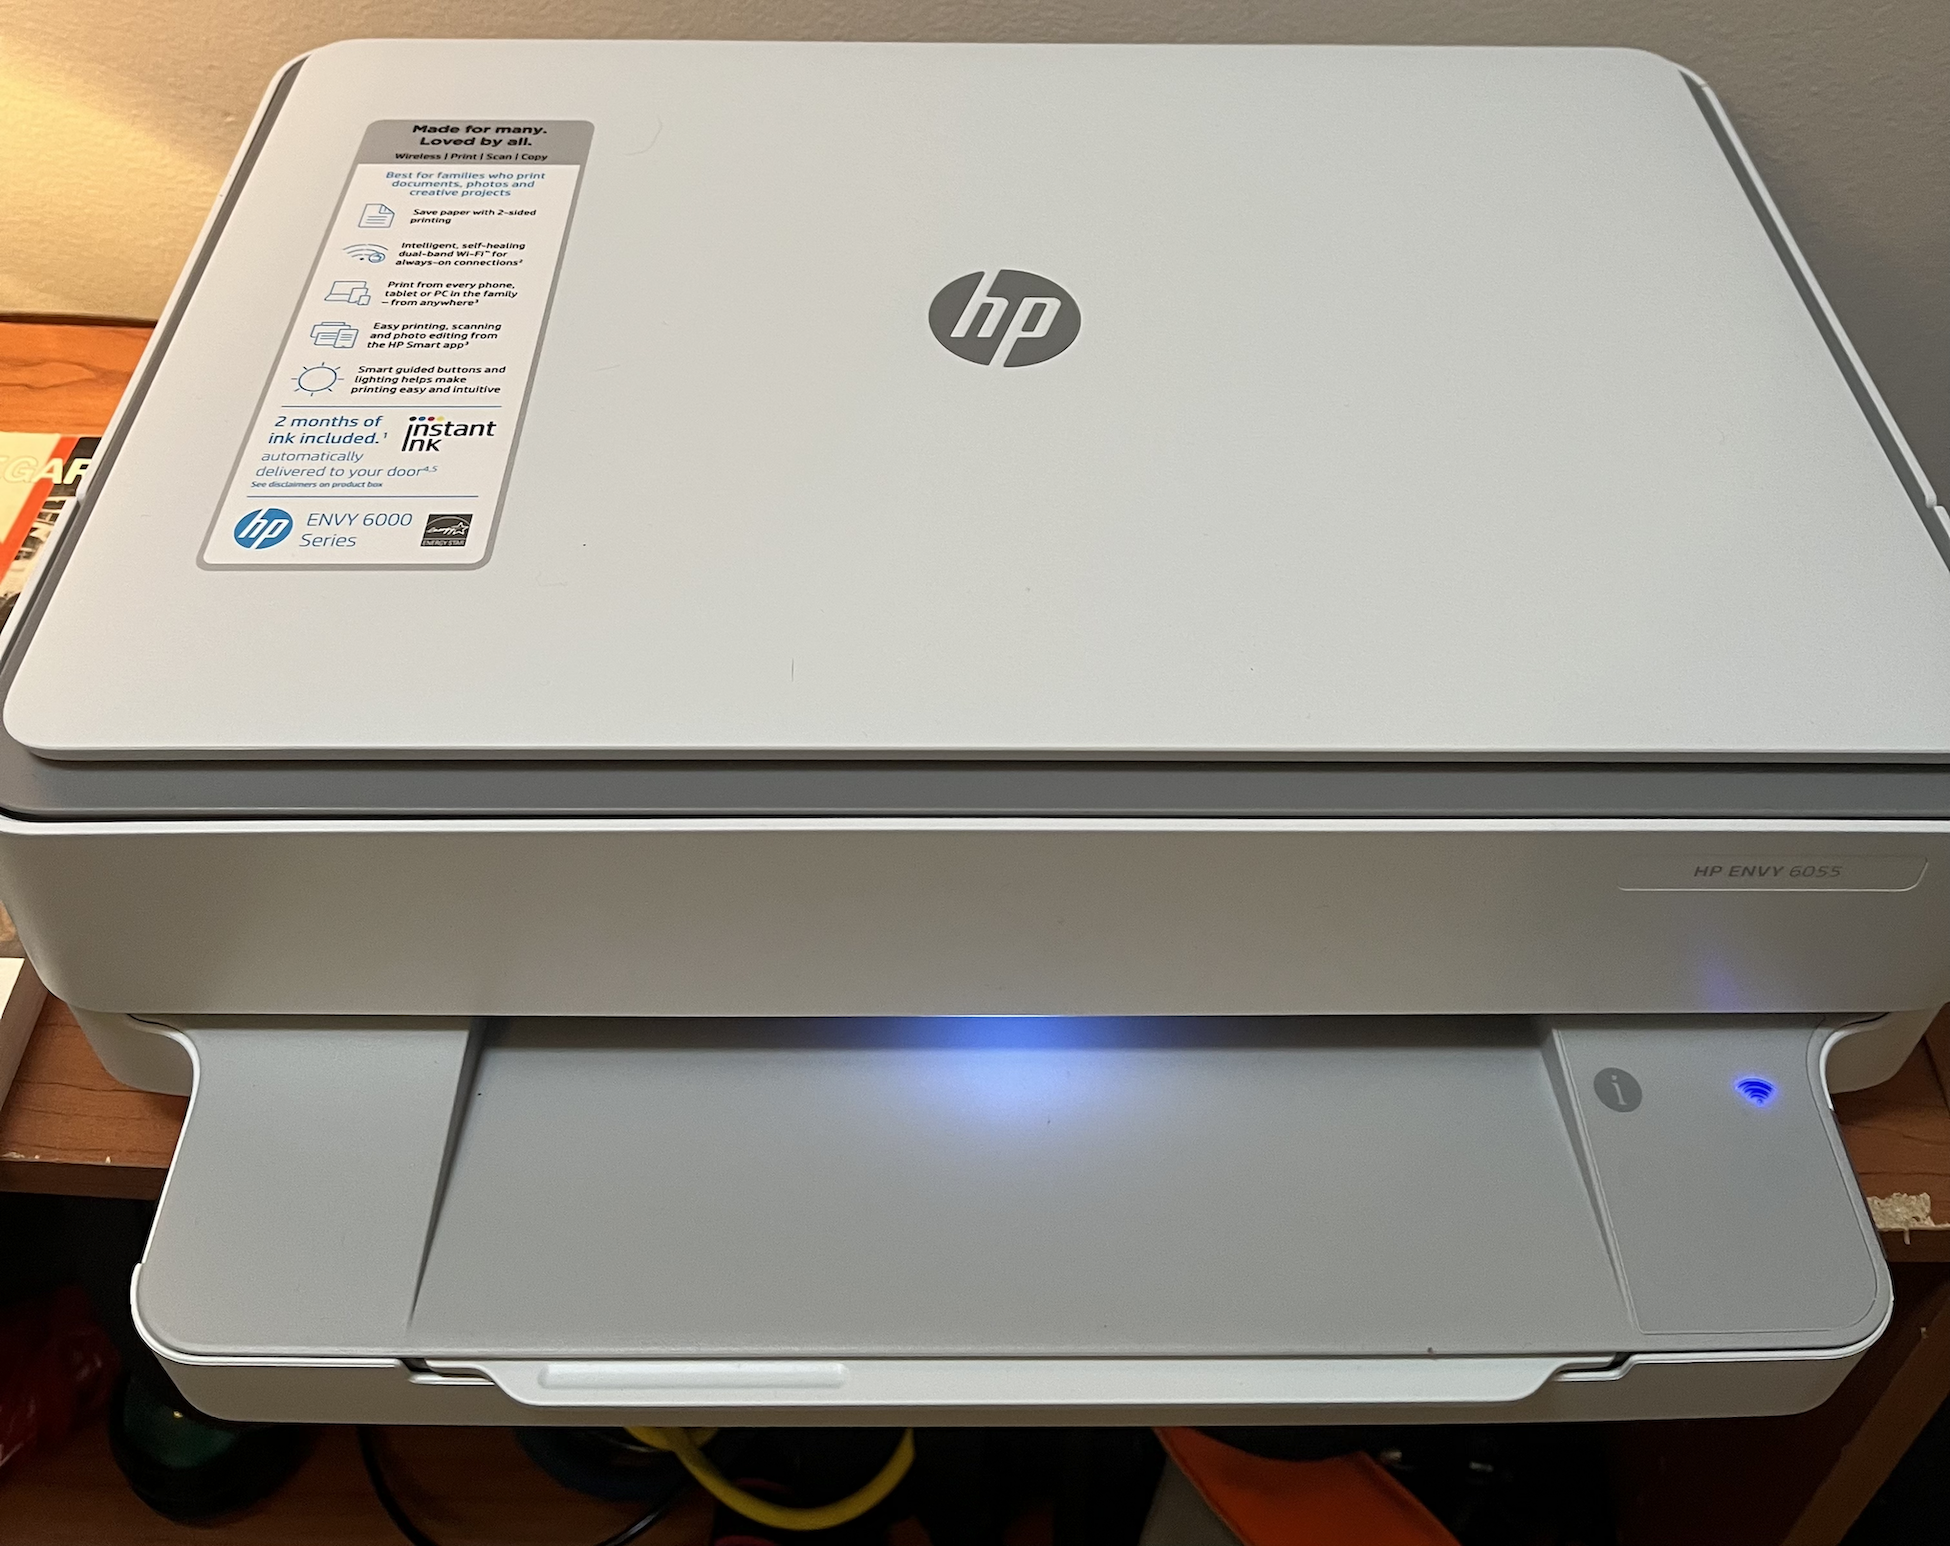 Envy 6000 printing partial lines - HP Support Community - 8263339